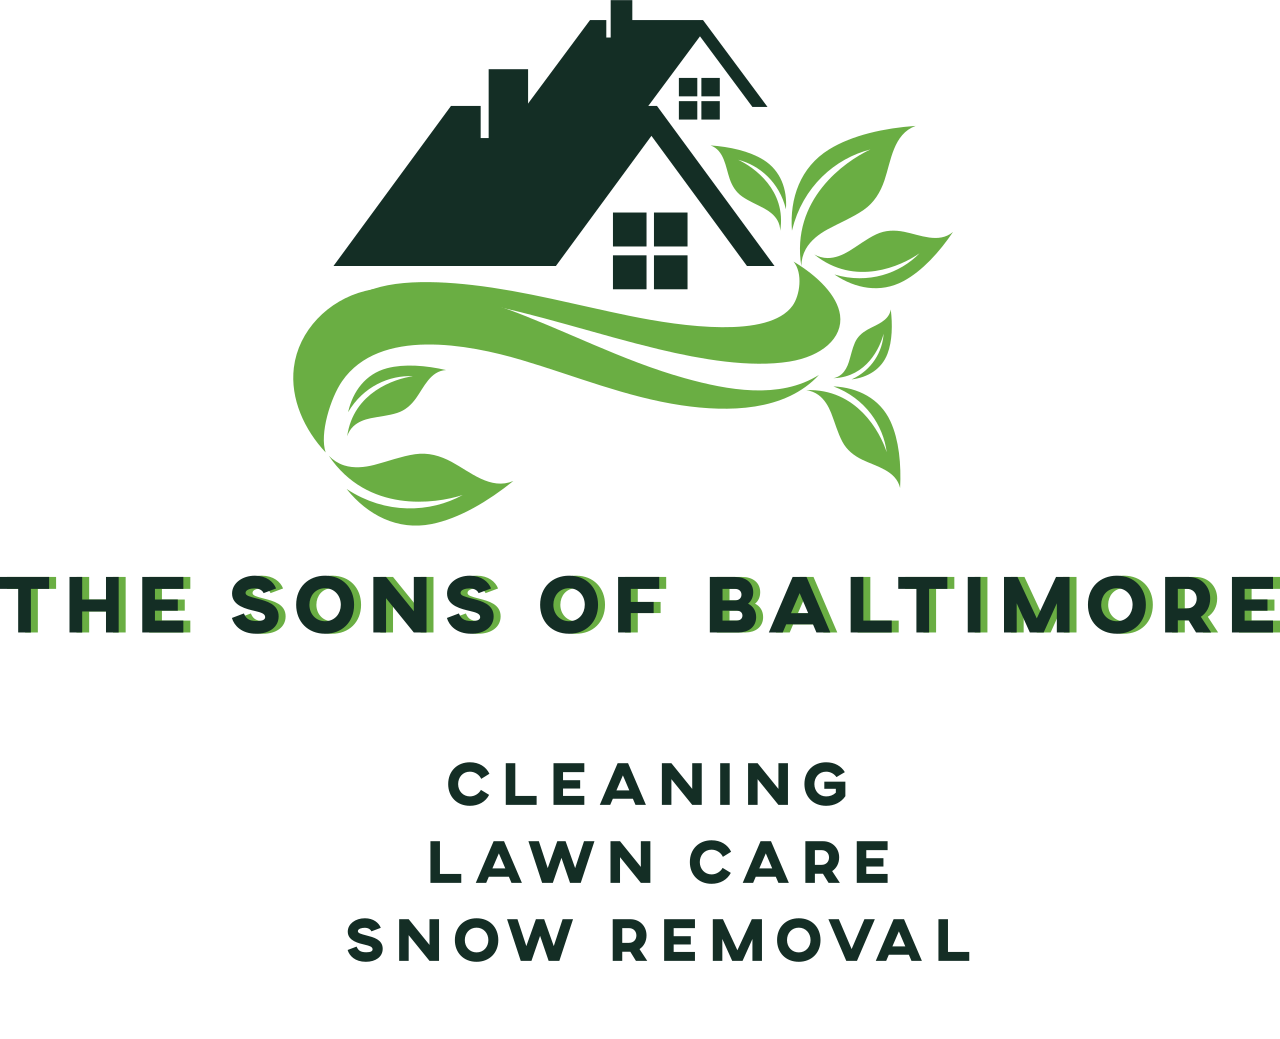 The Sons of Baltimore 's logo